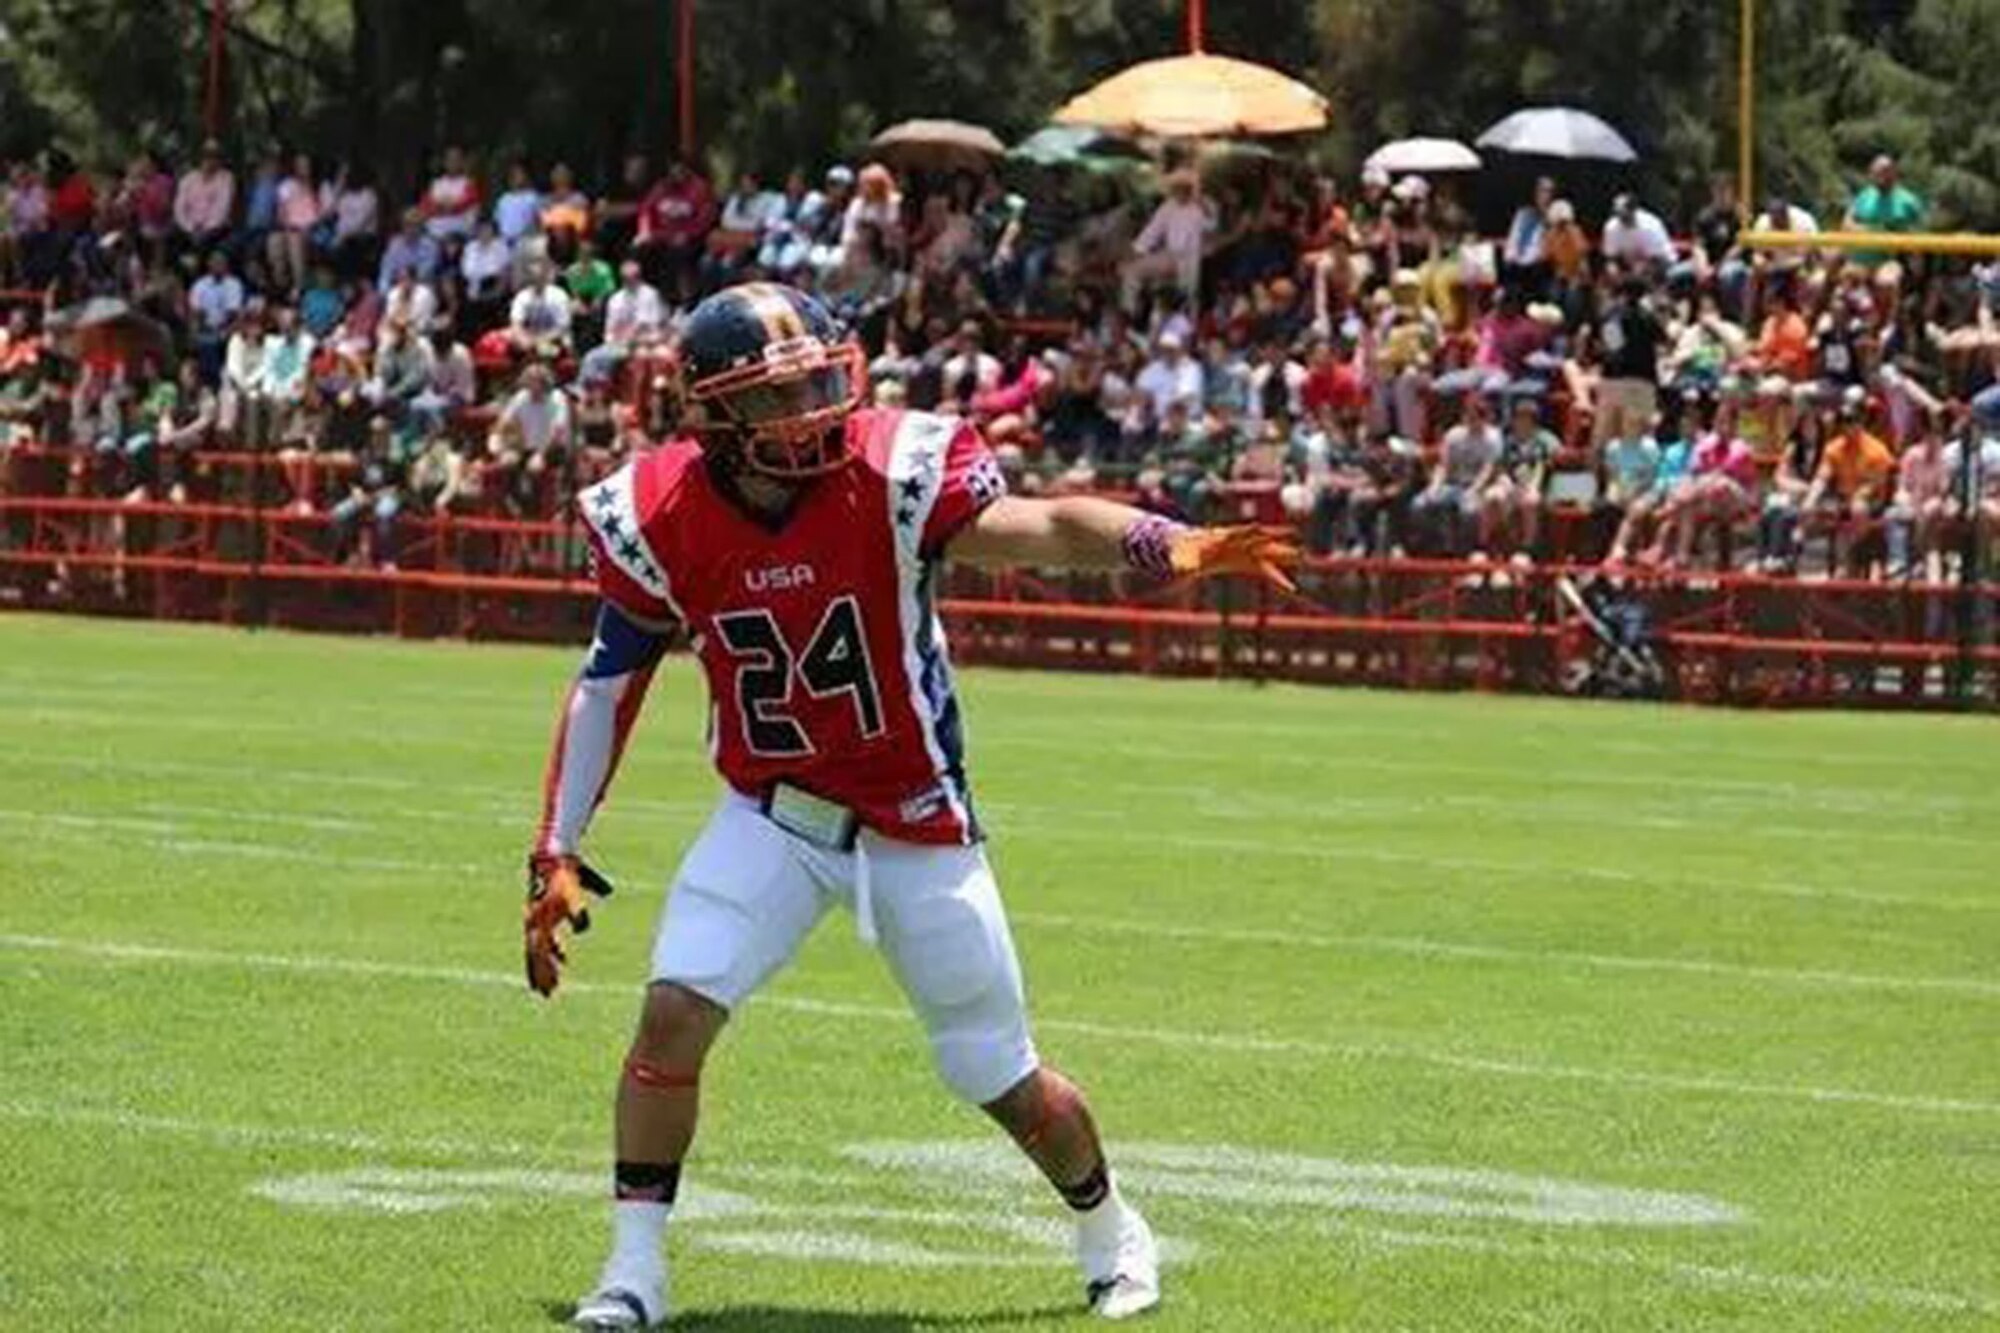 Senior Airman Ian Ramirez, an aeromedical evacuation technician assigned to the 445th Aeromedical Evacuation Squadron, gets ready to catch a pass during a game between the USA Patriots and Costa Rica Bulldogs May 2, 2015. (Courtesy photo)